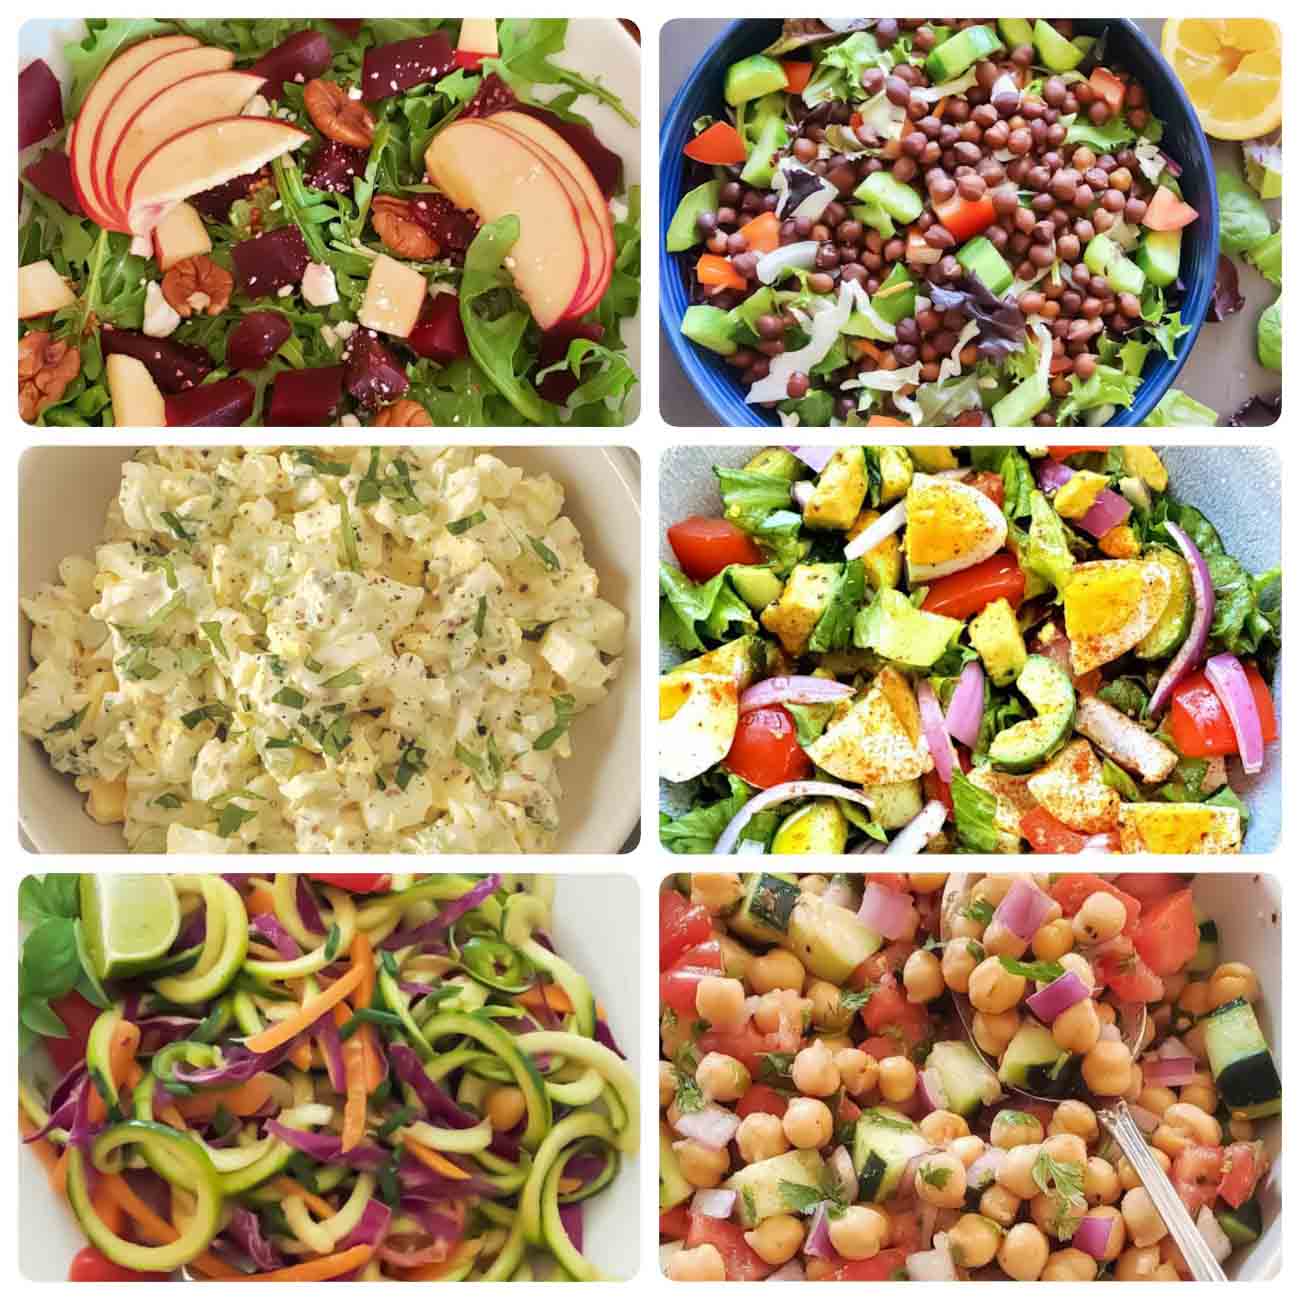 Healthy and colorful salad images.